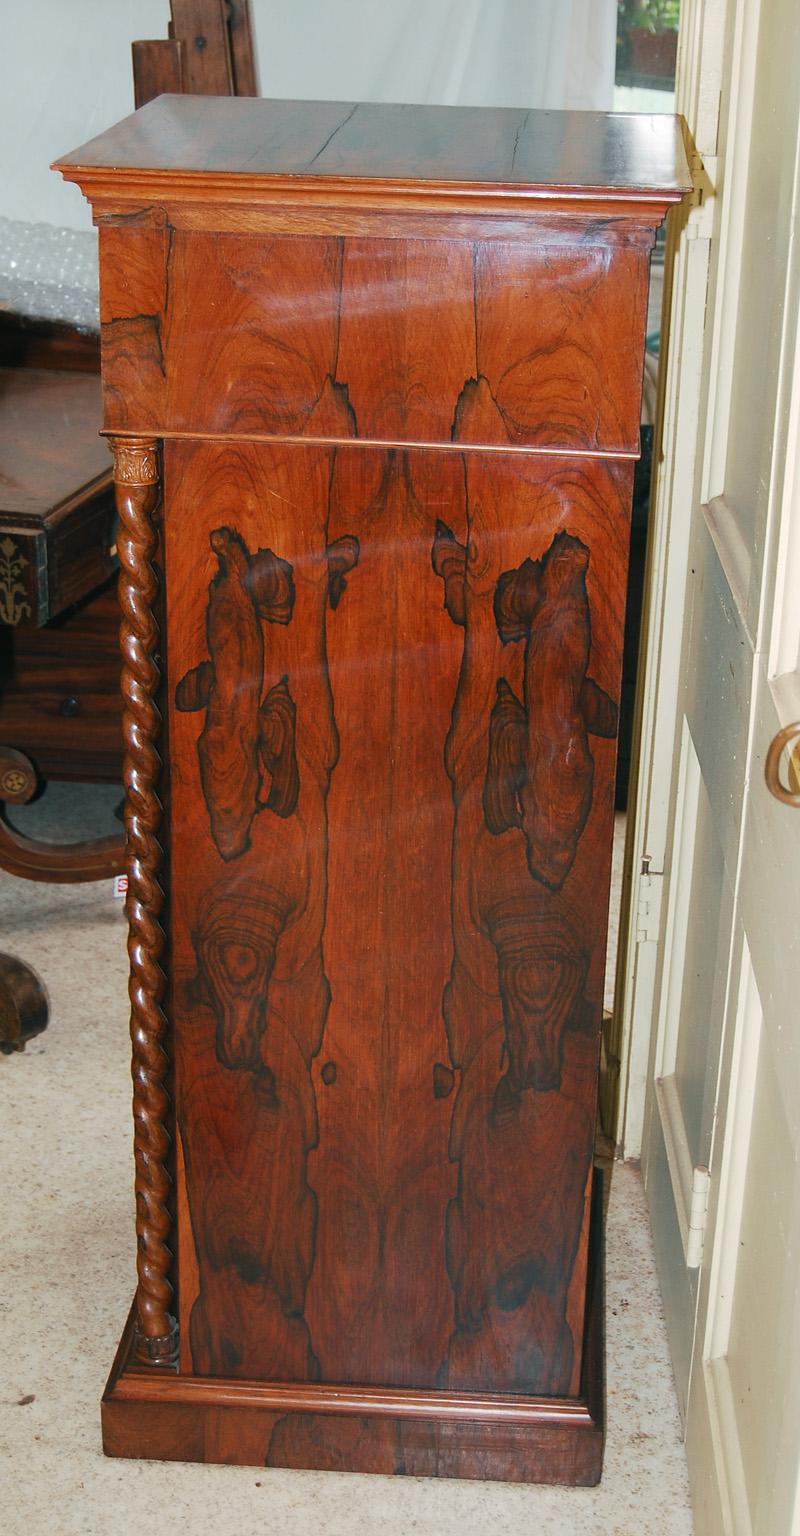 English Mid-19th Century Pair of Pedestal Cabinets with Barley Twist Columns For Sale 7